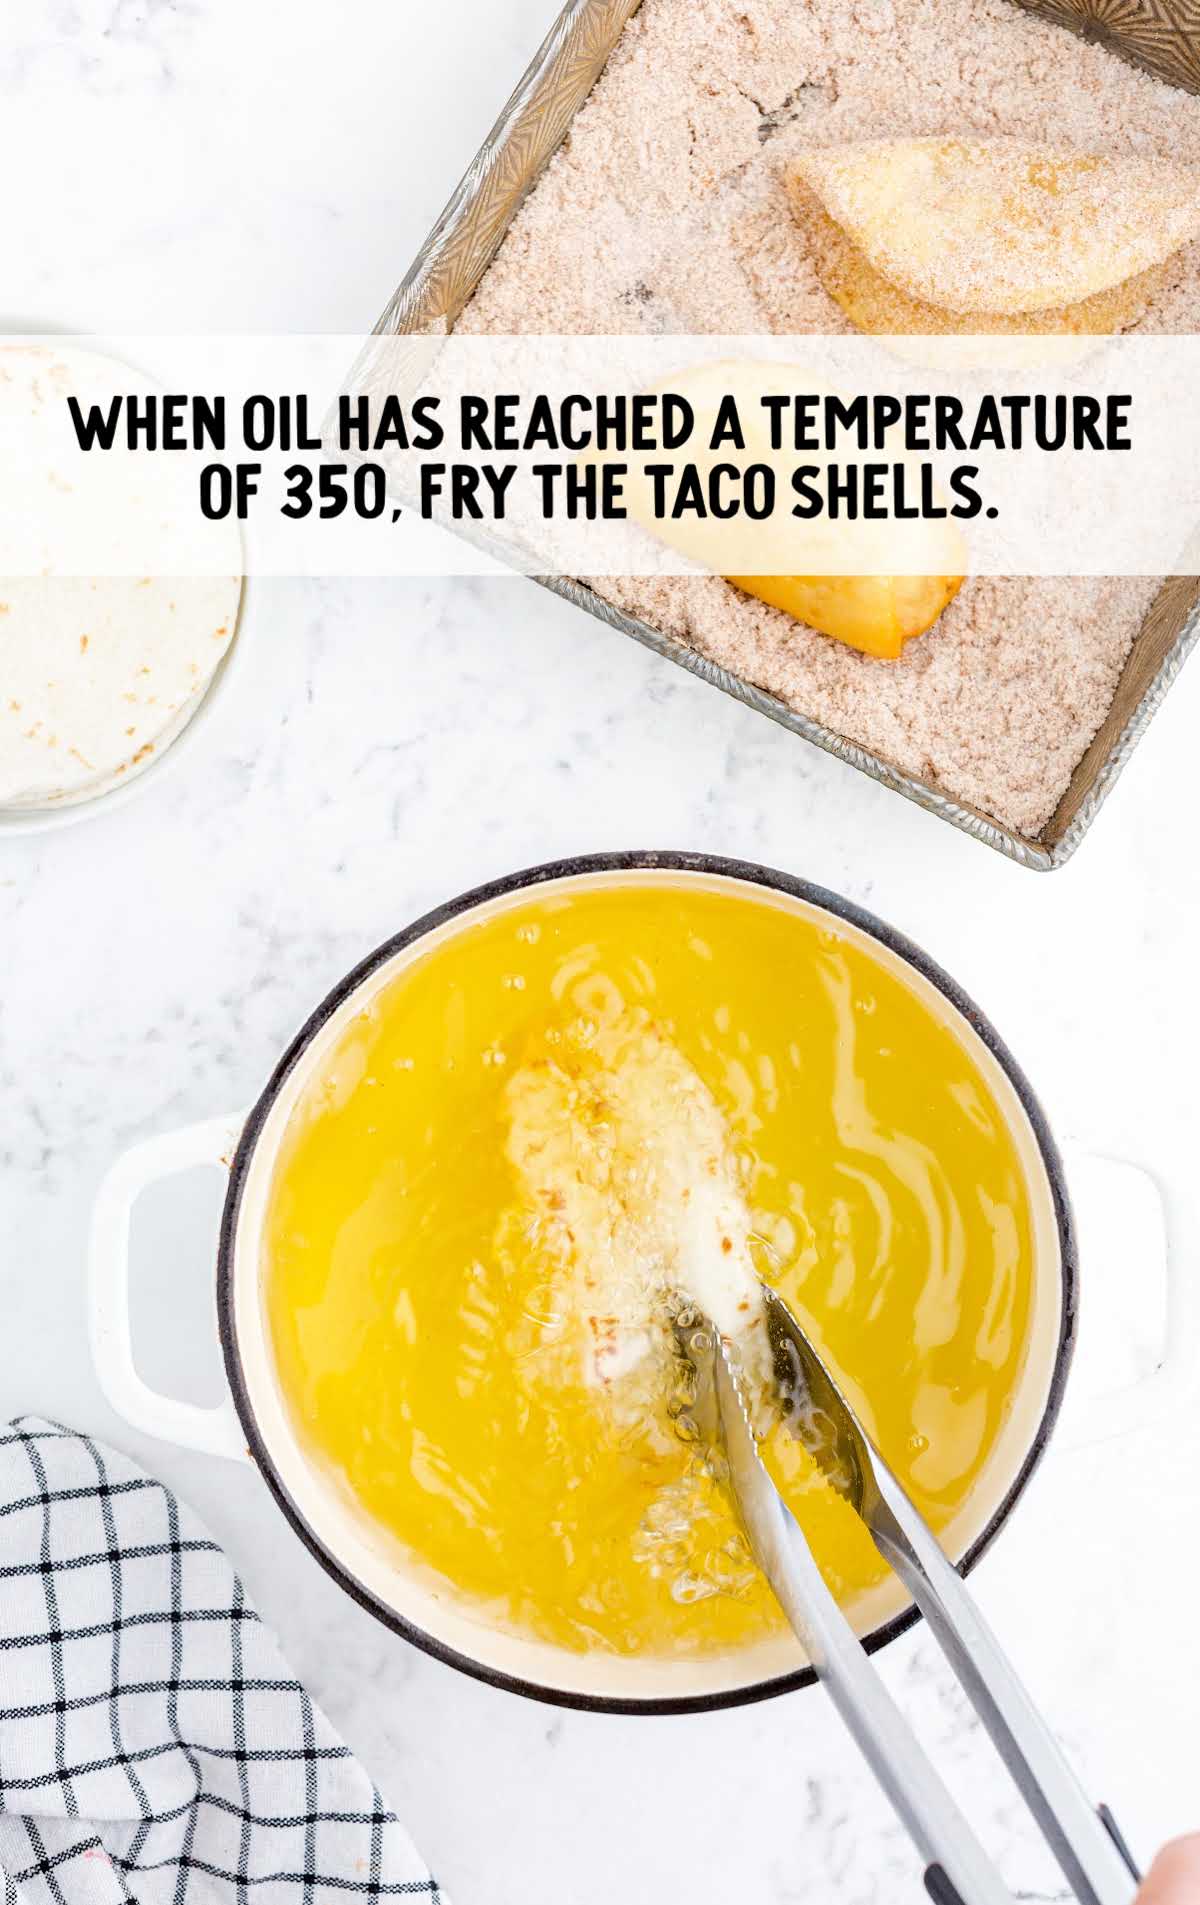 place taco shells into the oil